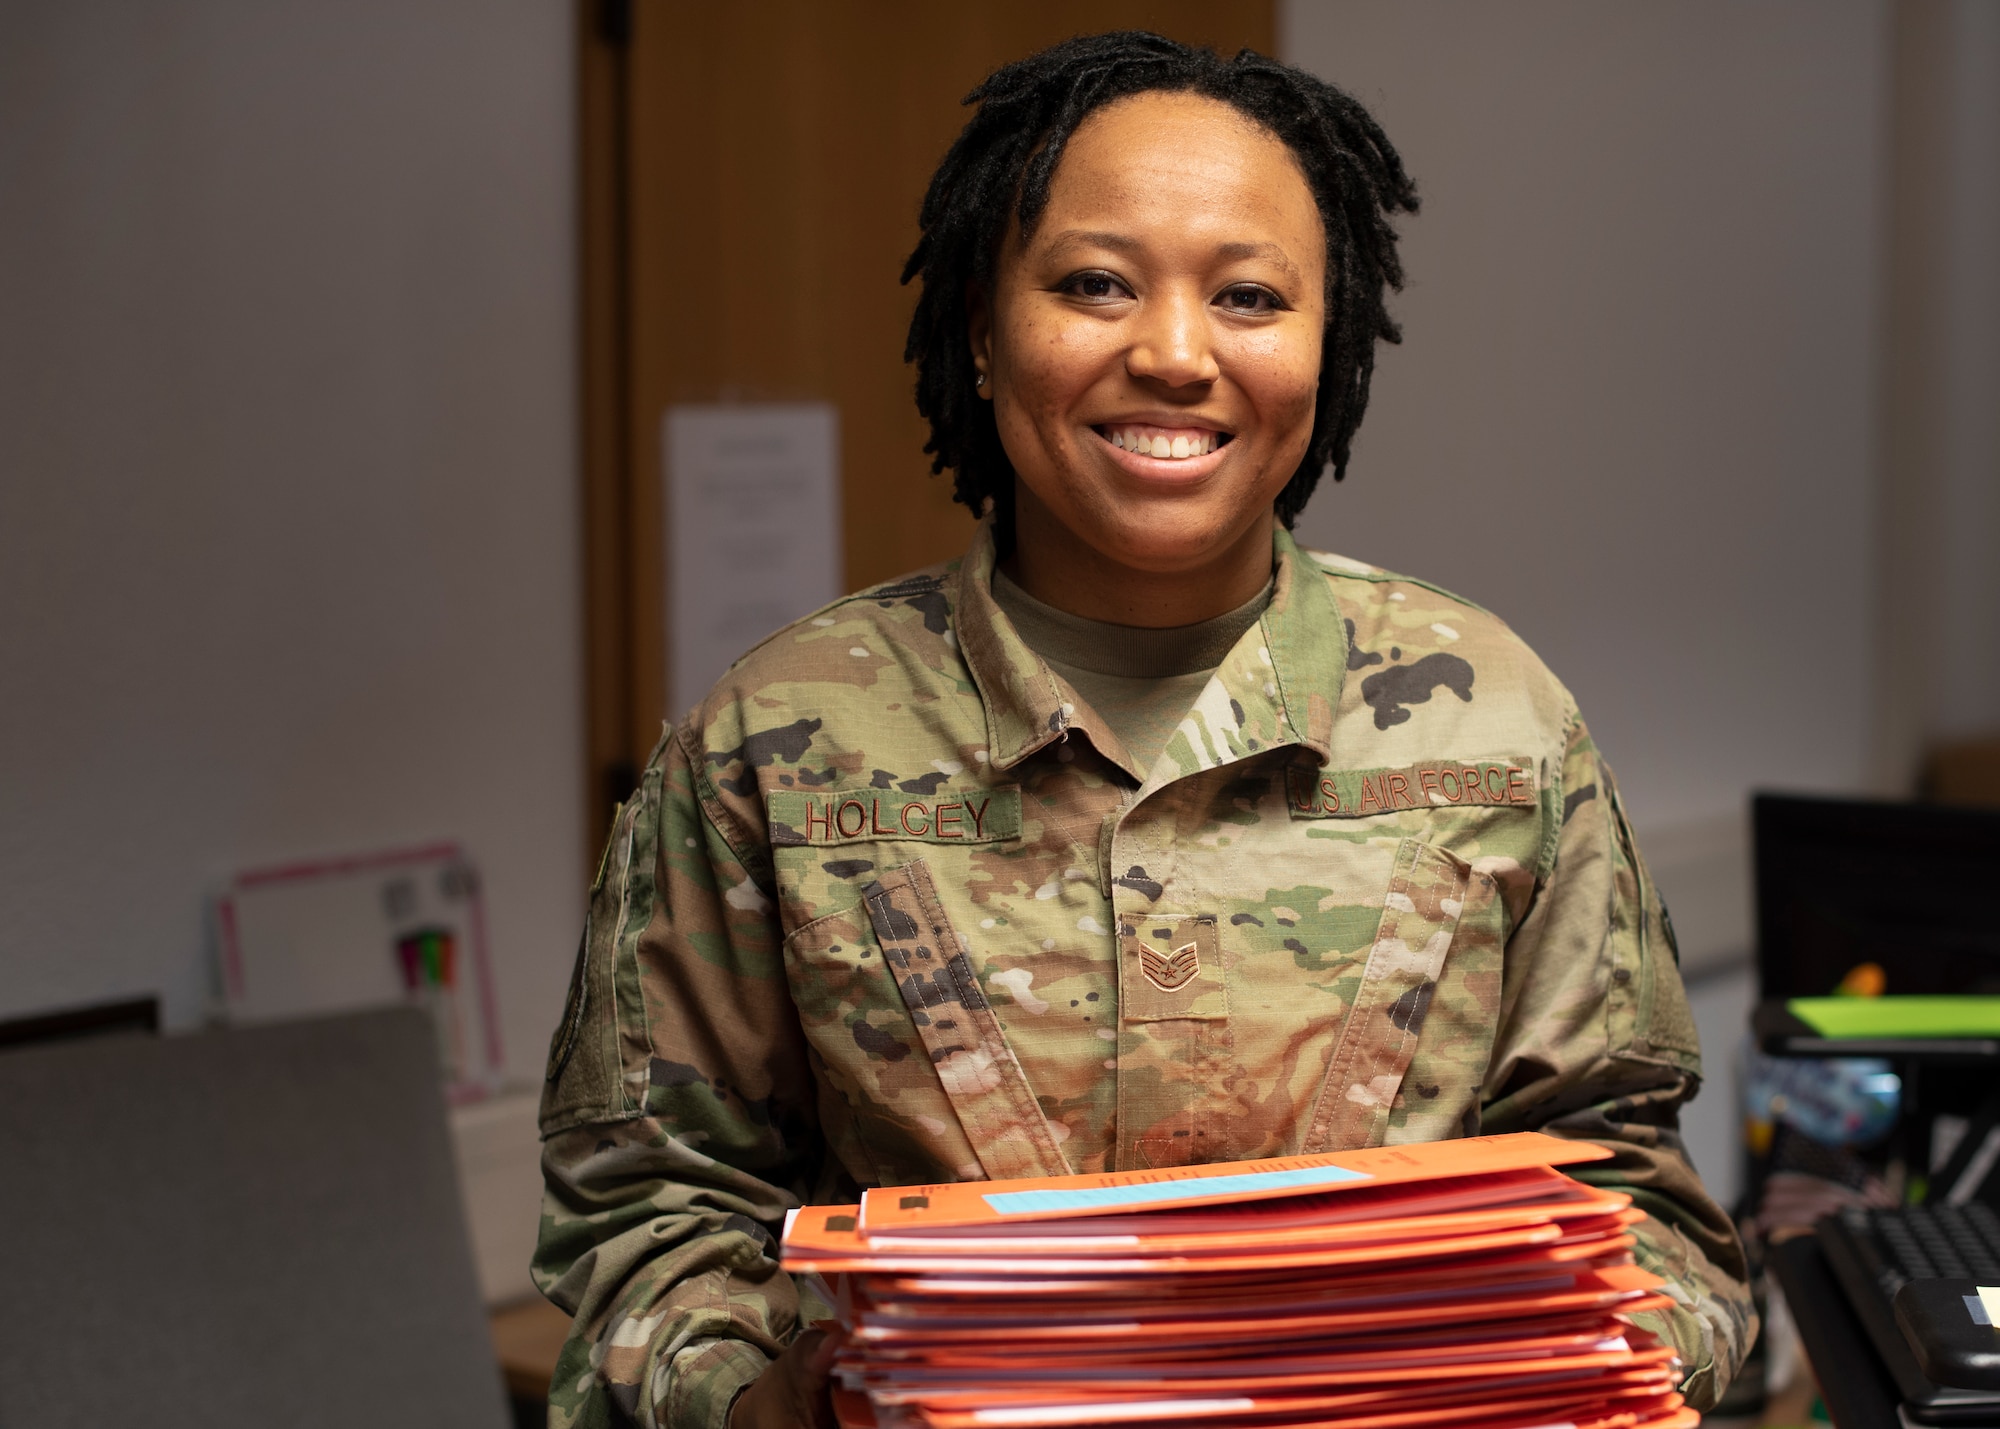 U.S. Air Force Staff Sgt. Jasmine Holcey, 786th Force Support Squadron relocations supervisor, poses for a photo holding a day’s worth of personnel out-processing folders at Ramstein Air Base, Germany, June 1, 2020.